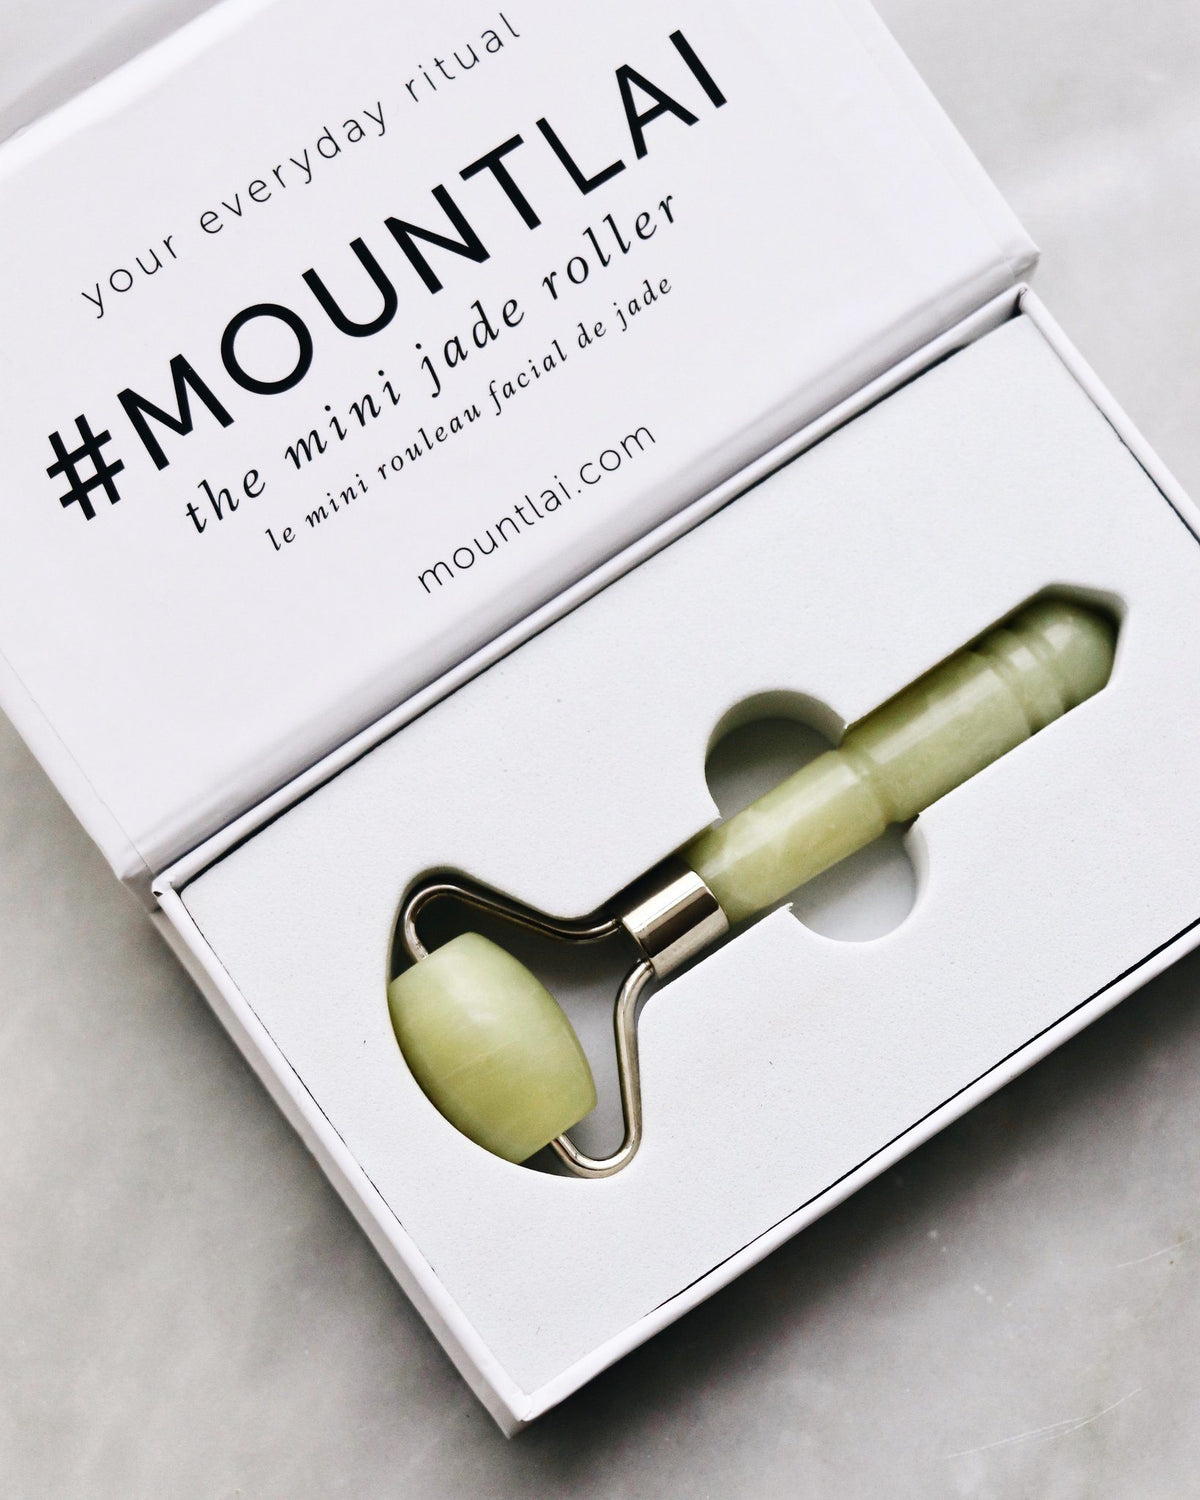 The De-Puffing Mini Jade Roller Facial Tools Mount Lai - Genuine Selection